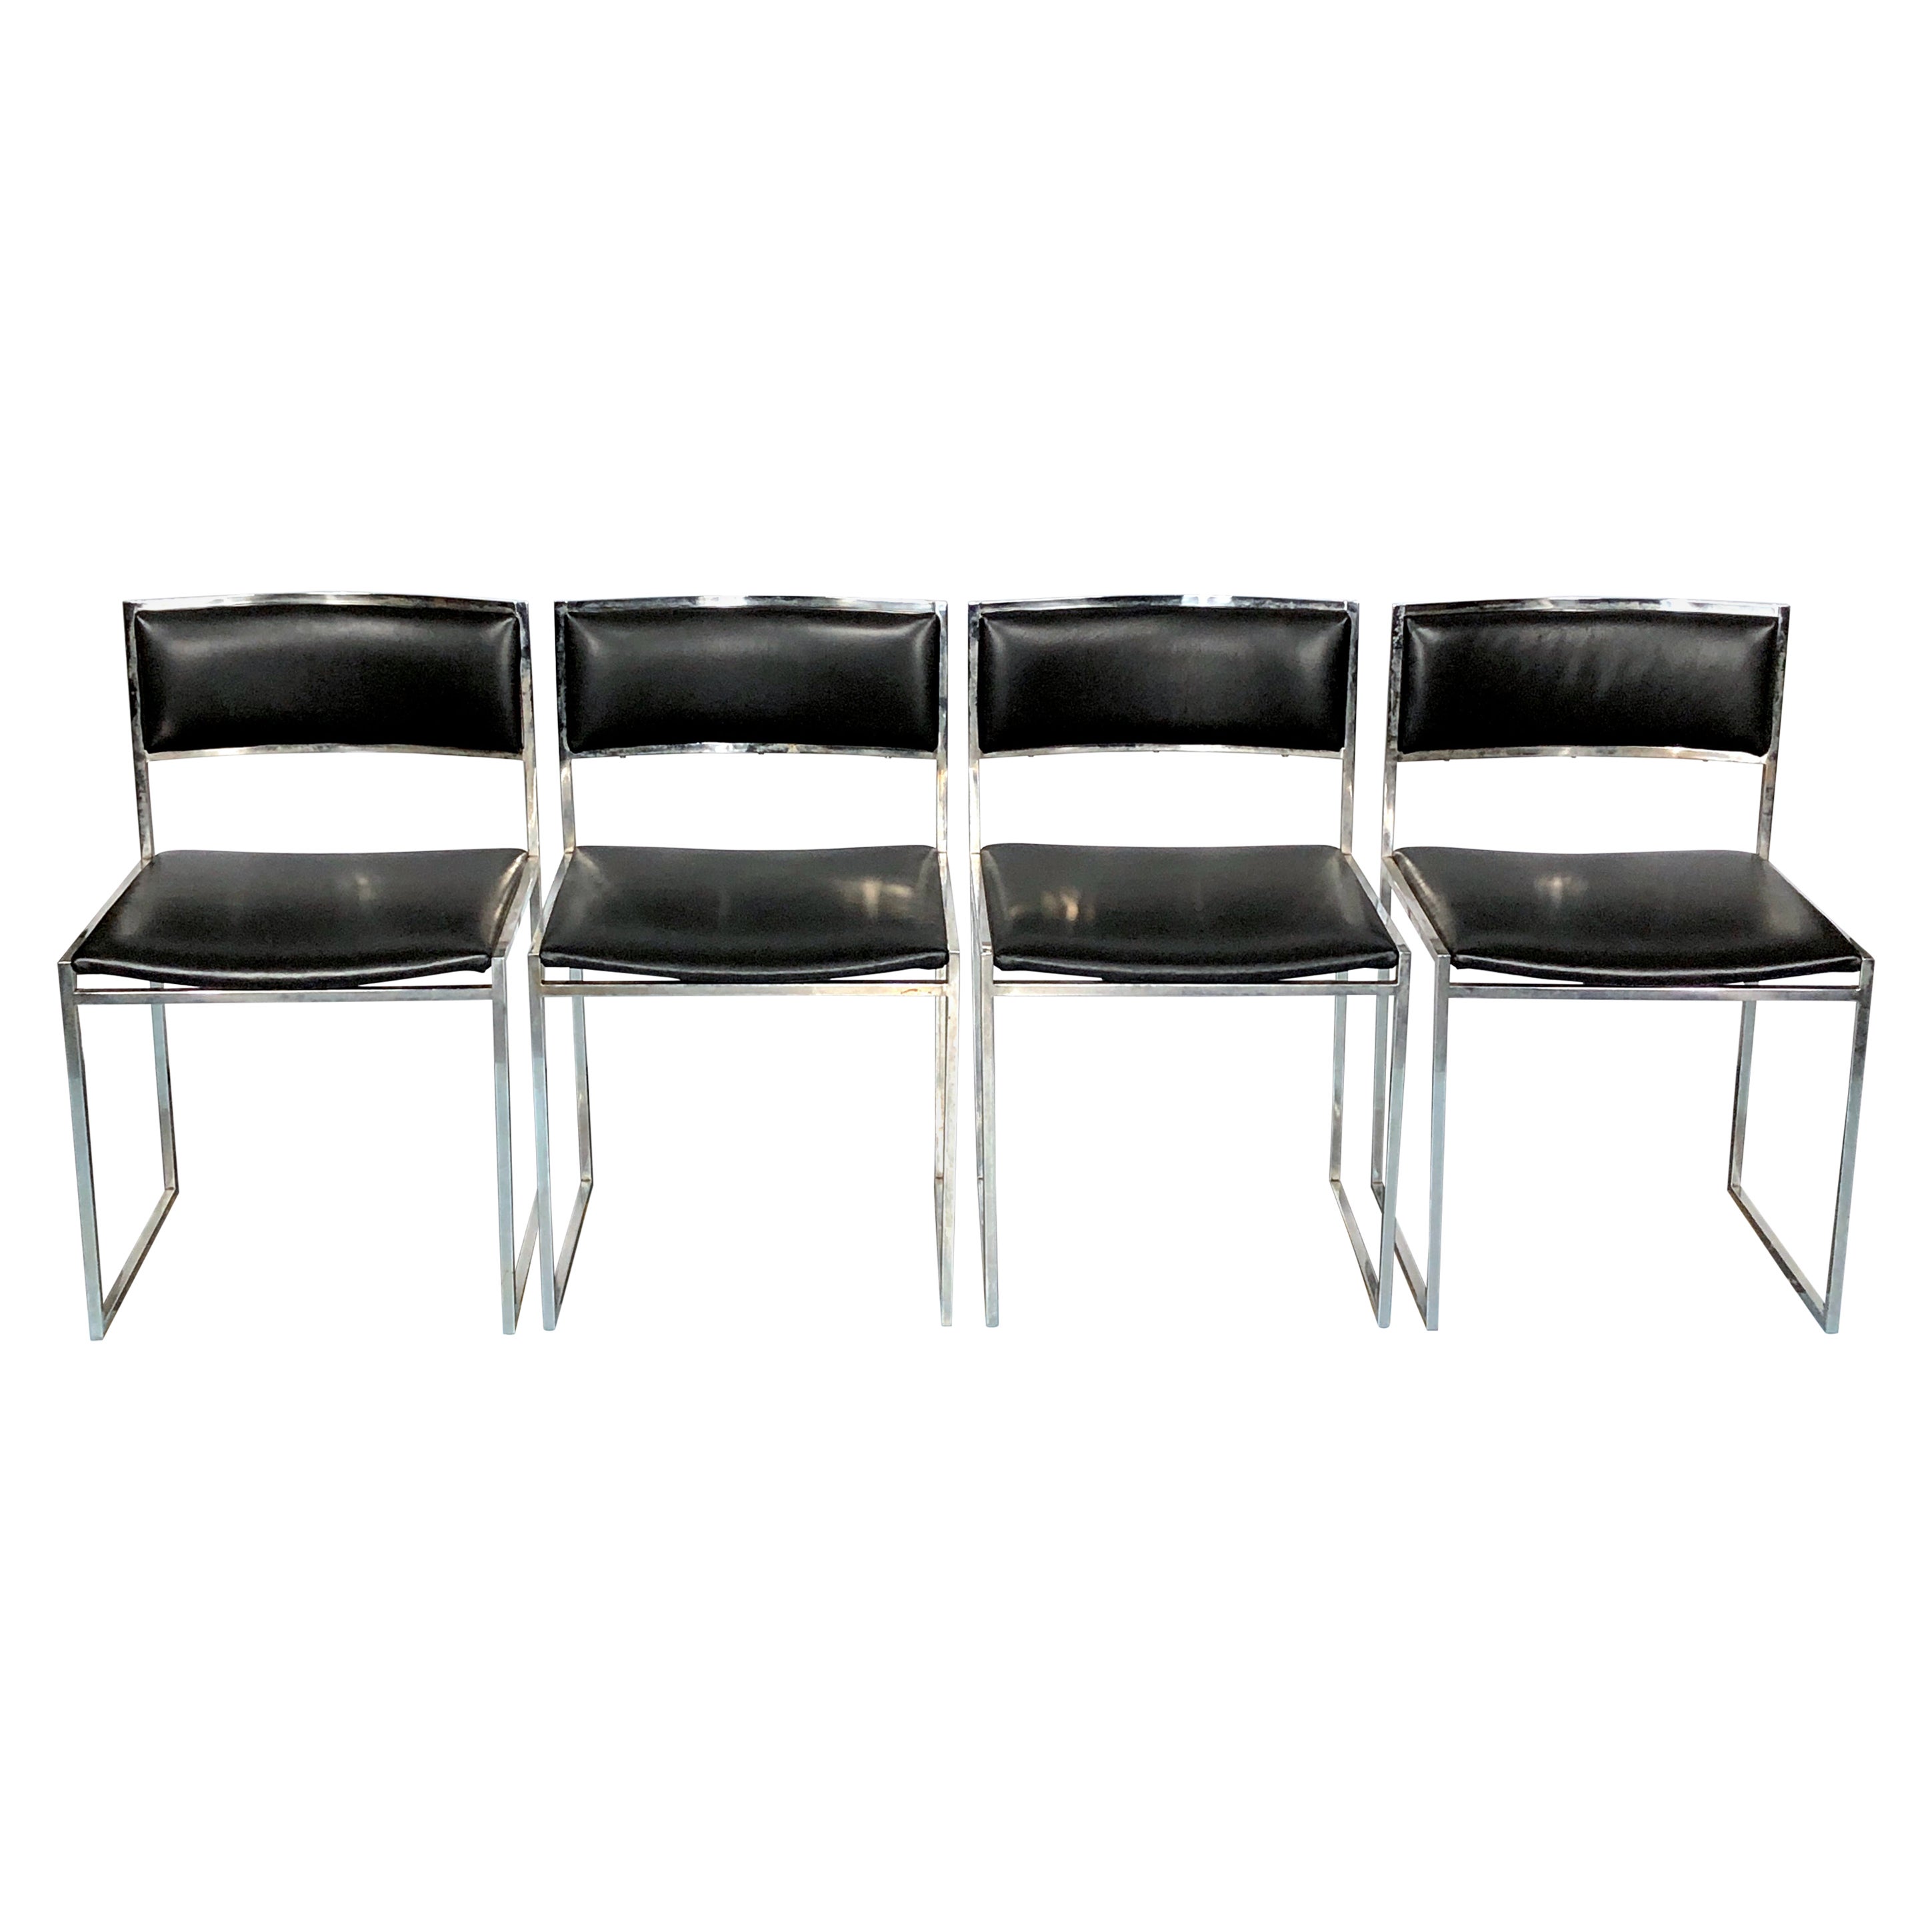 Romeo Rega, Set of Four Chrome and Leather Dining Chairs from 60s